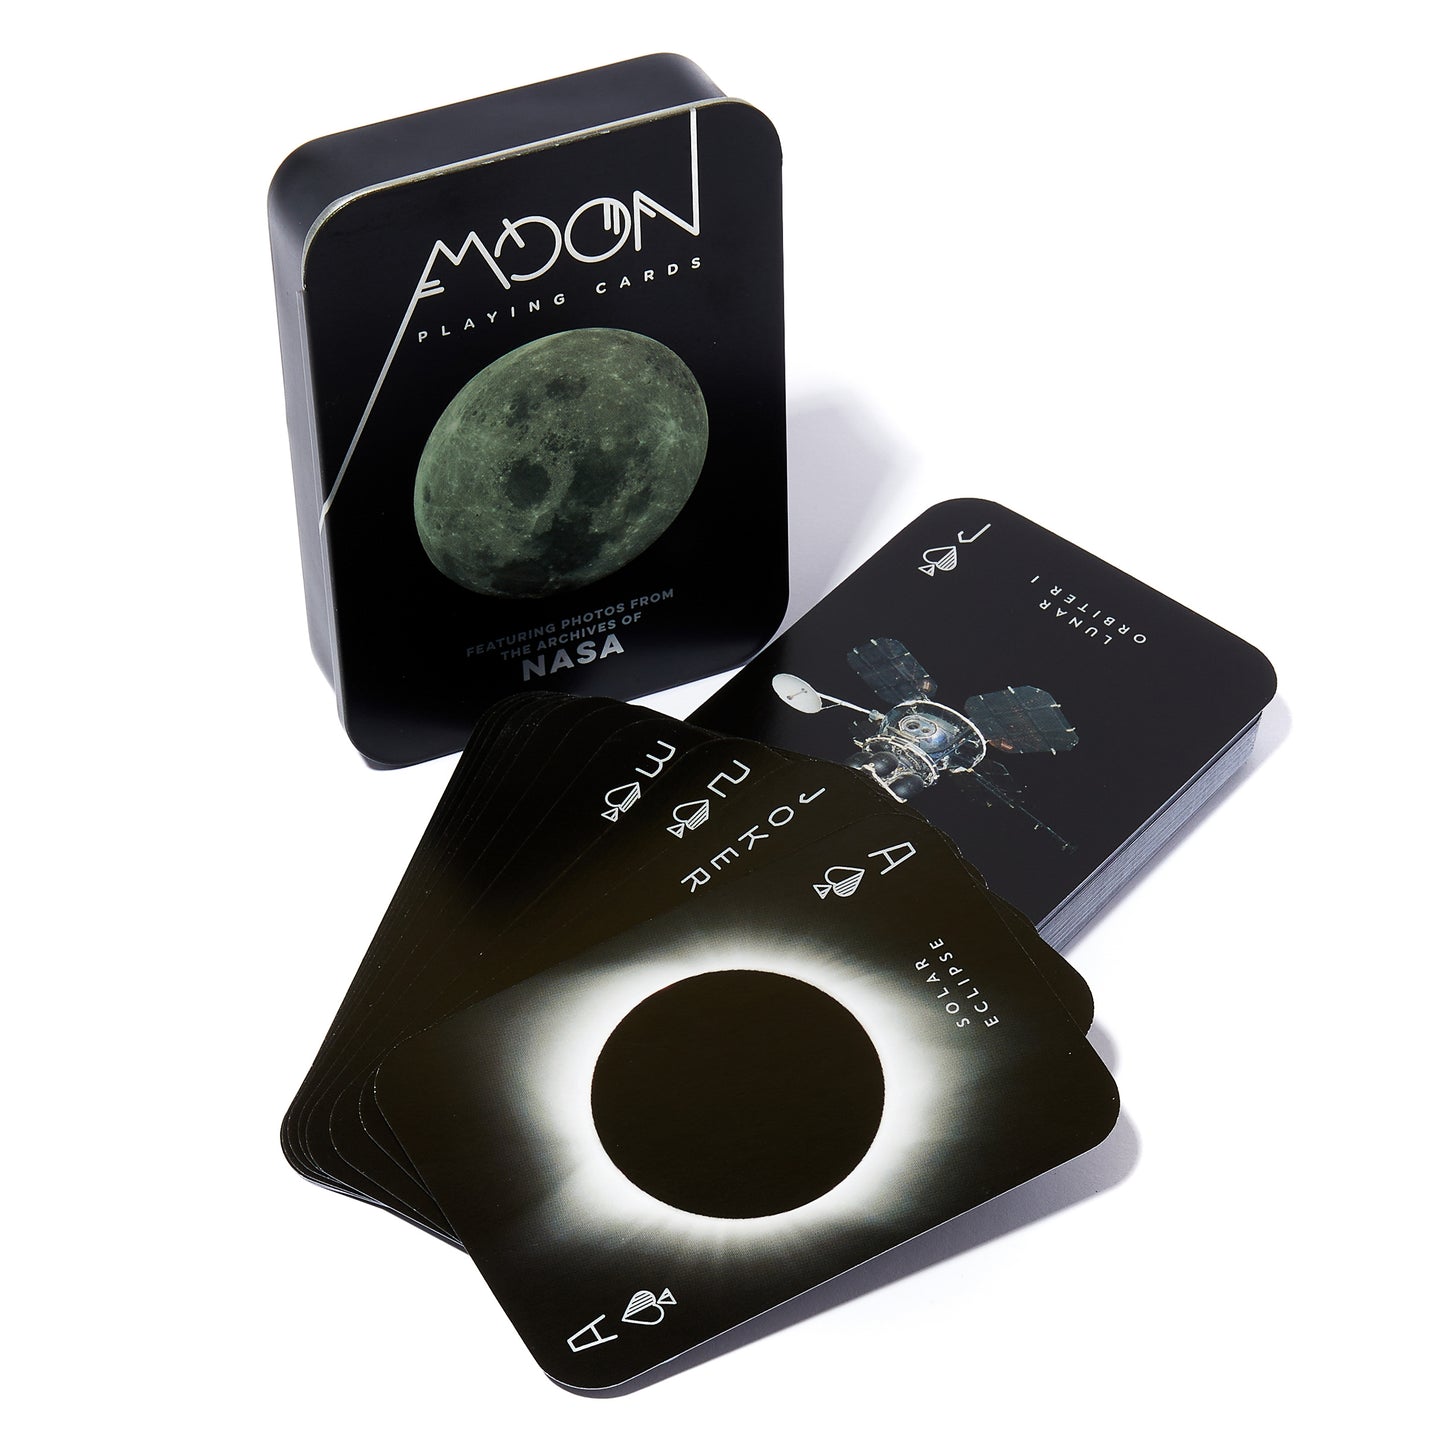 MOON PLAYING CARDS